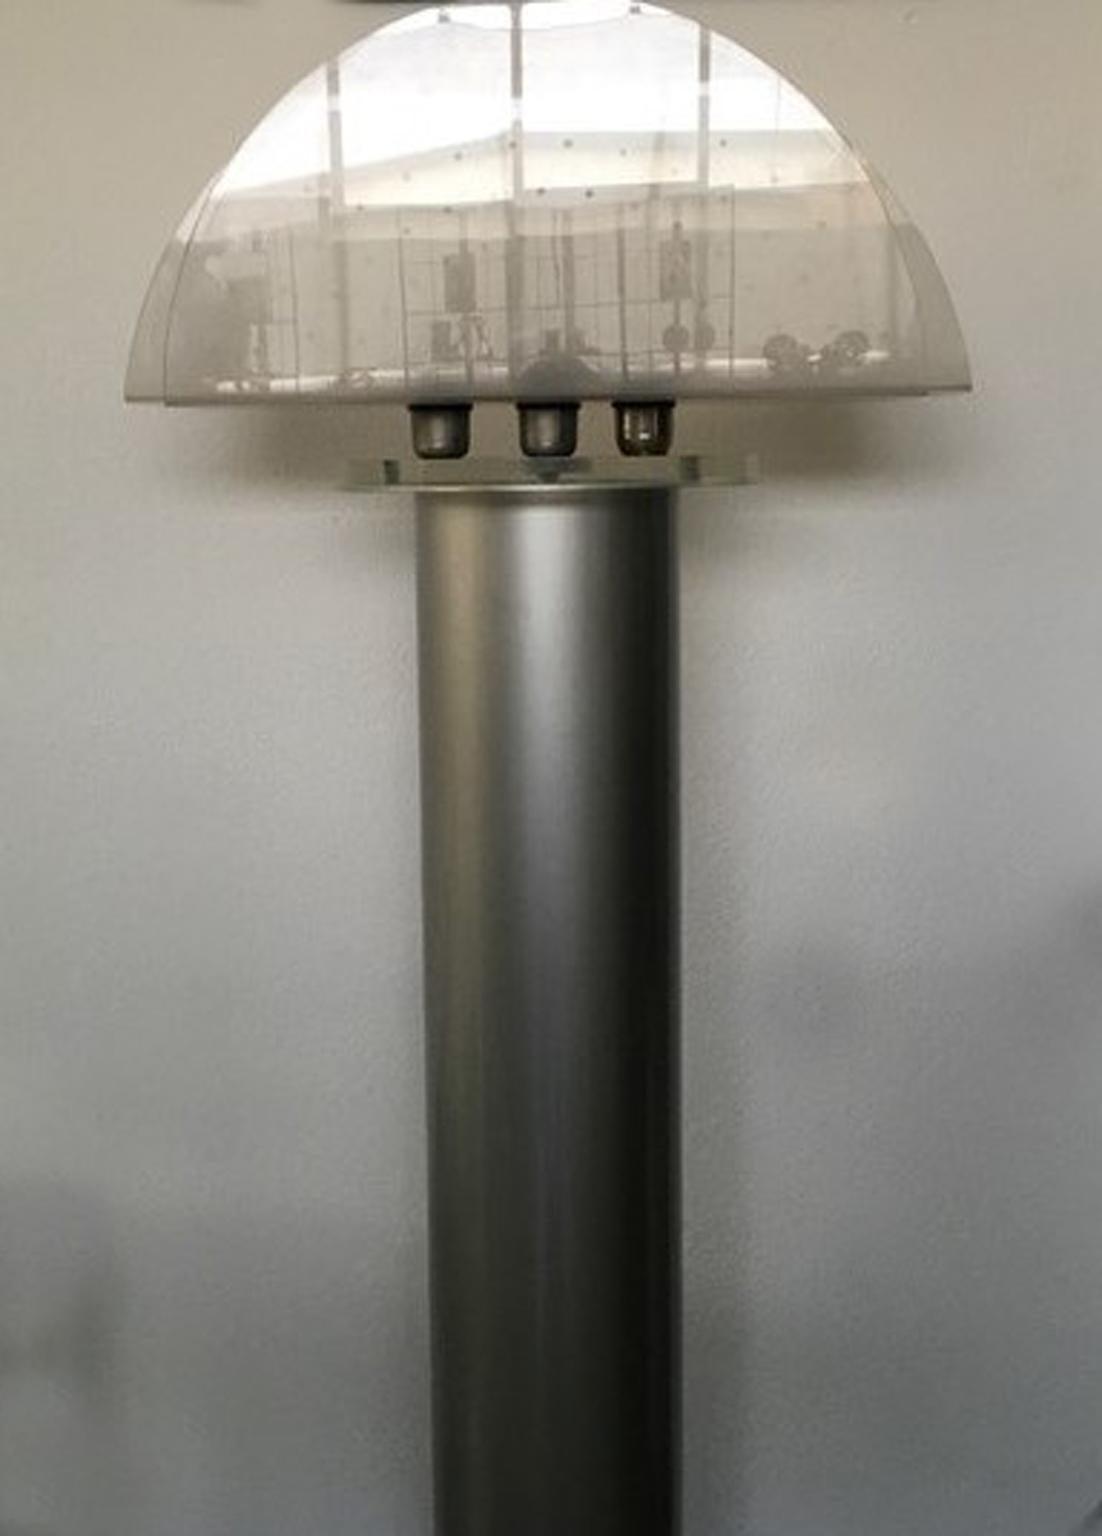 This Postmodern style floor lamp is a prototype of a collection made from the Italian factory called Sealine, existants in the 1970.
The shape is unique with this large and particular plexiglass lampshade. It has many holes on the surface.
The name